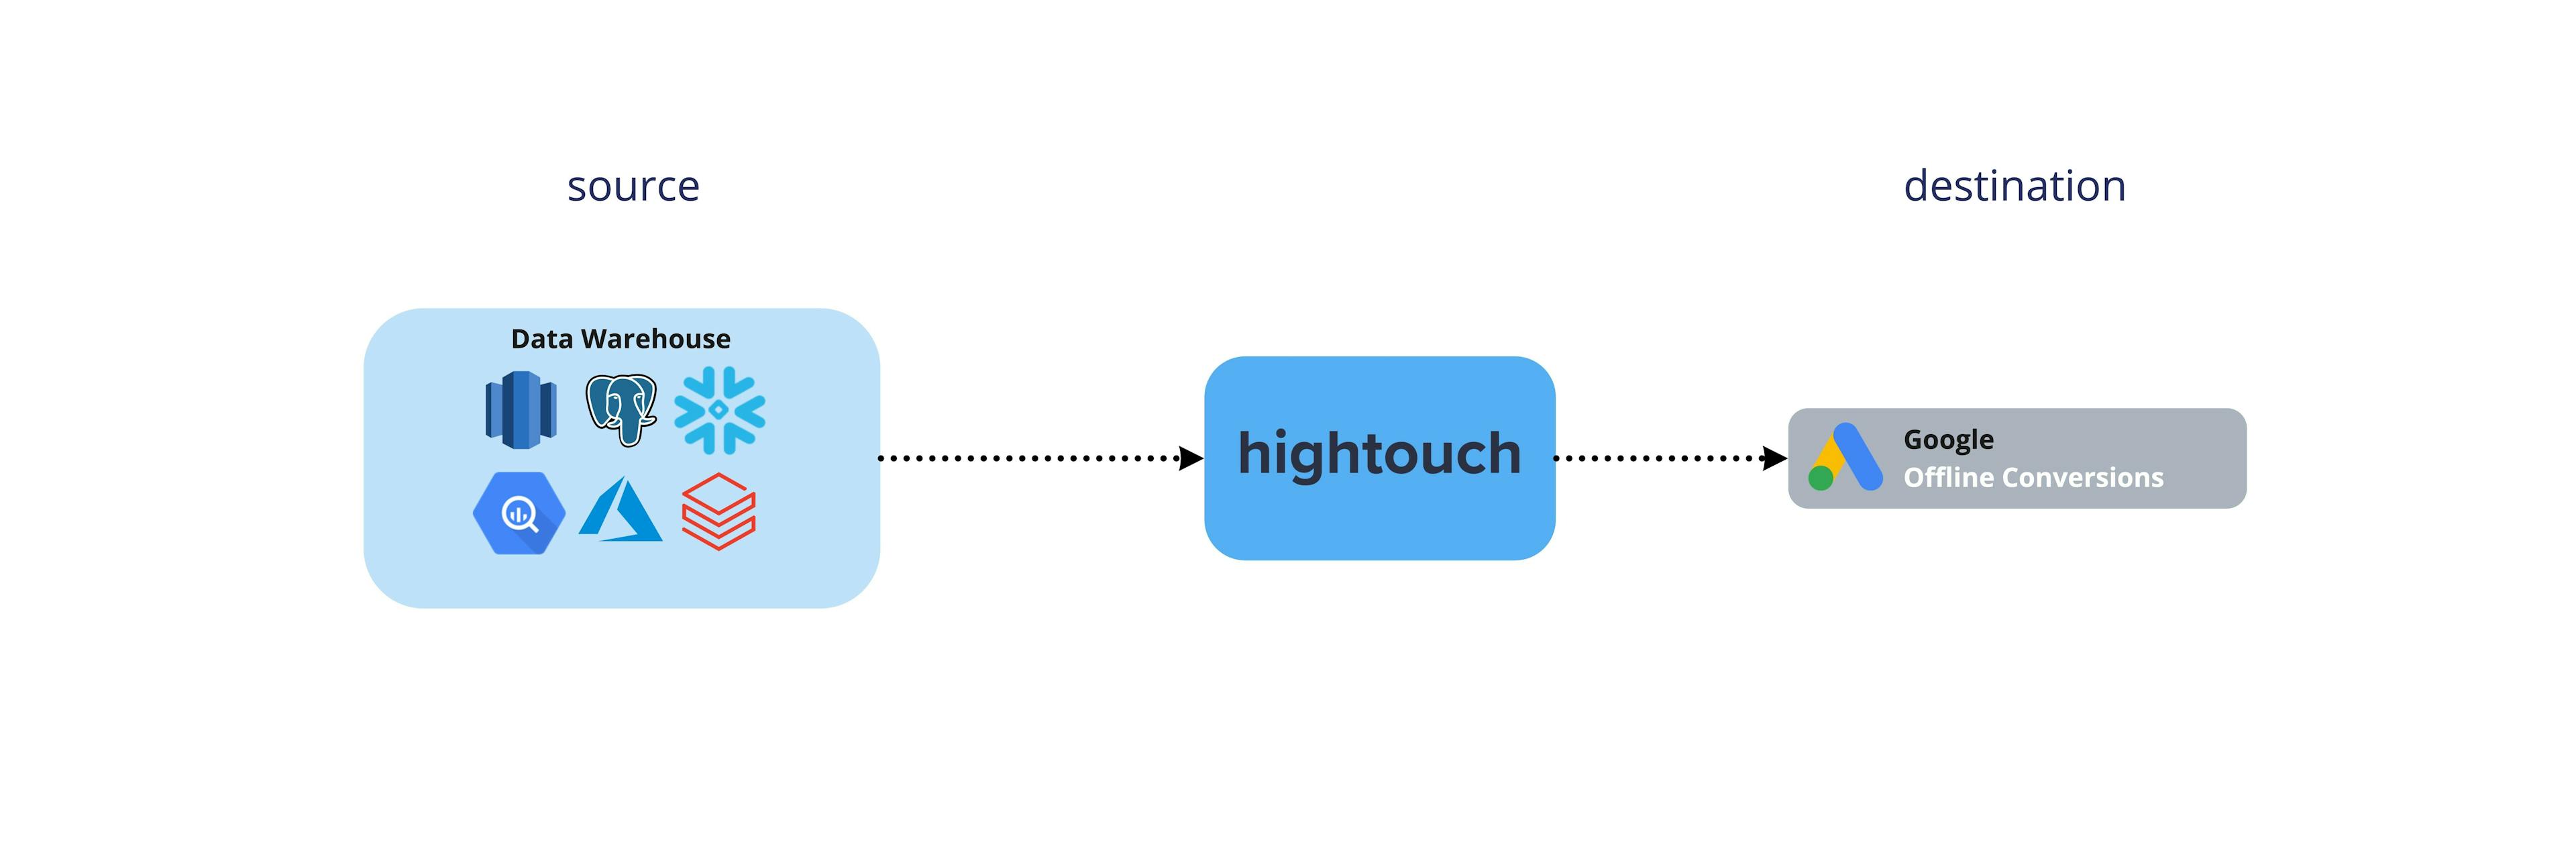 The workflow from source to destination using Hightouch